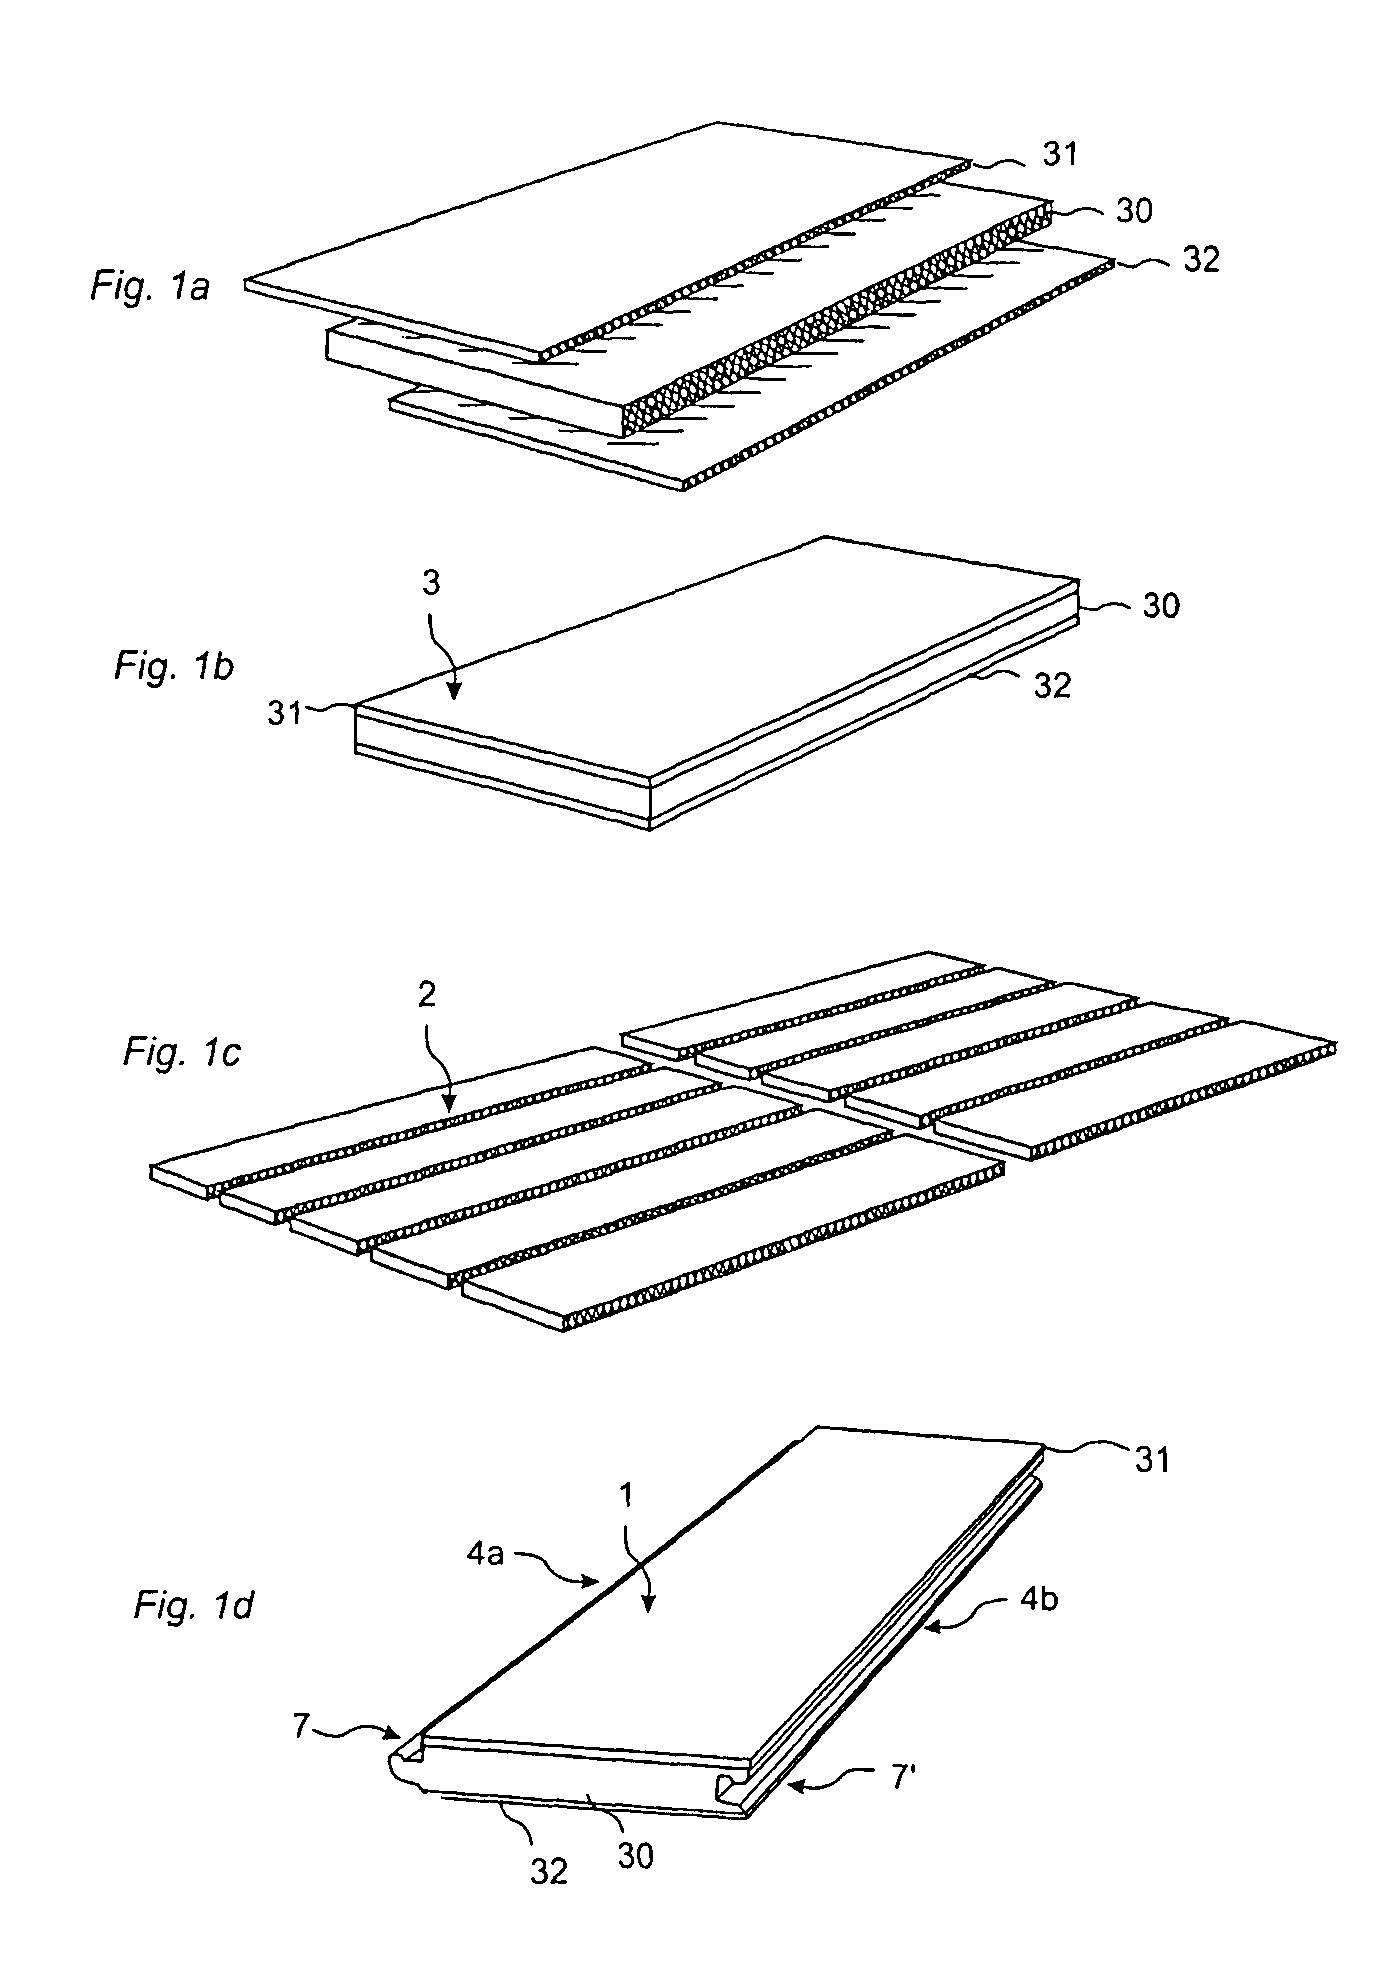 Method for manufacturing floorboard having surface layer of flexible and resilient fibers